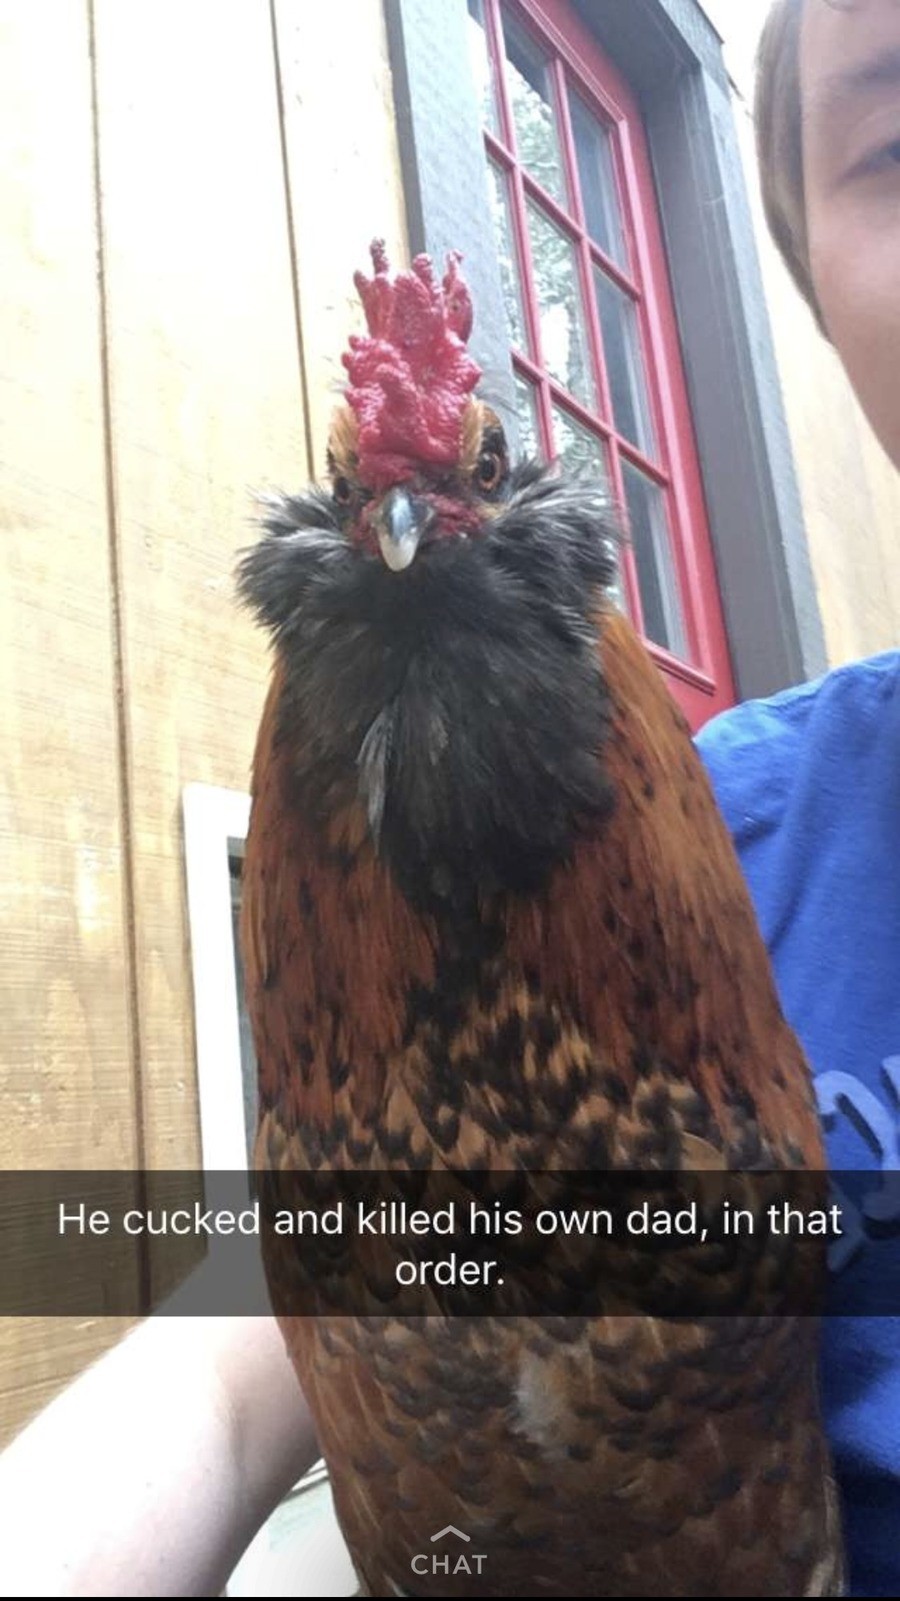 Mess with the Cockadoodle. Get the glockadoodle. He cocked and killed his own dad, in that order.